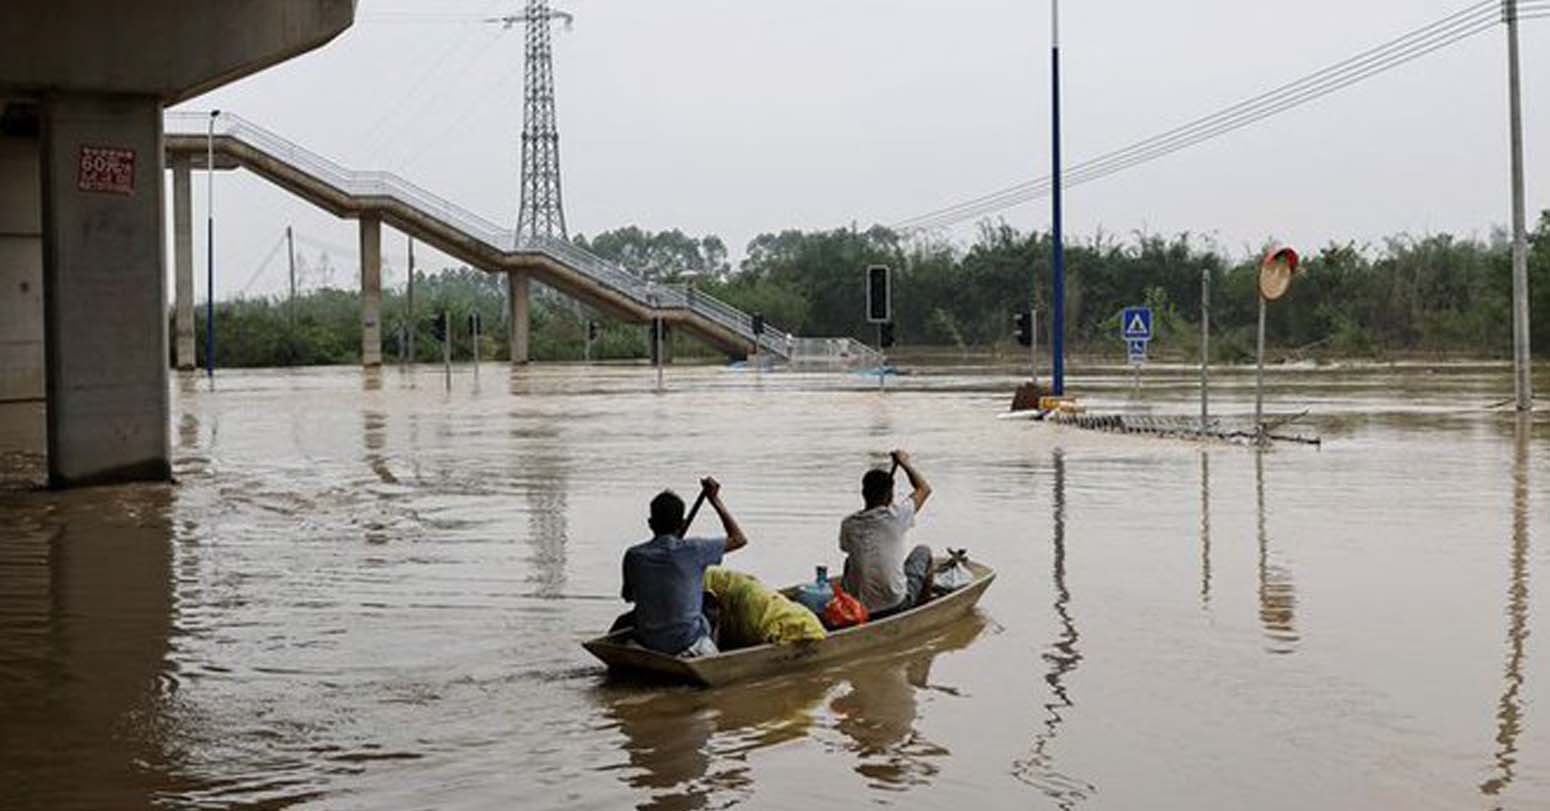 More Than 100,000 Evacuated After Deadly Floods In China